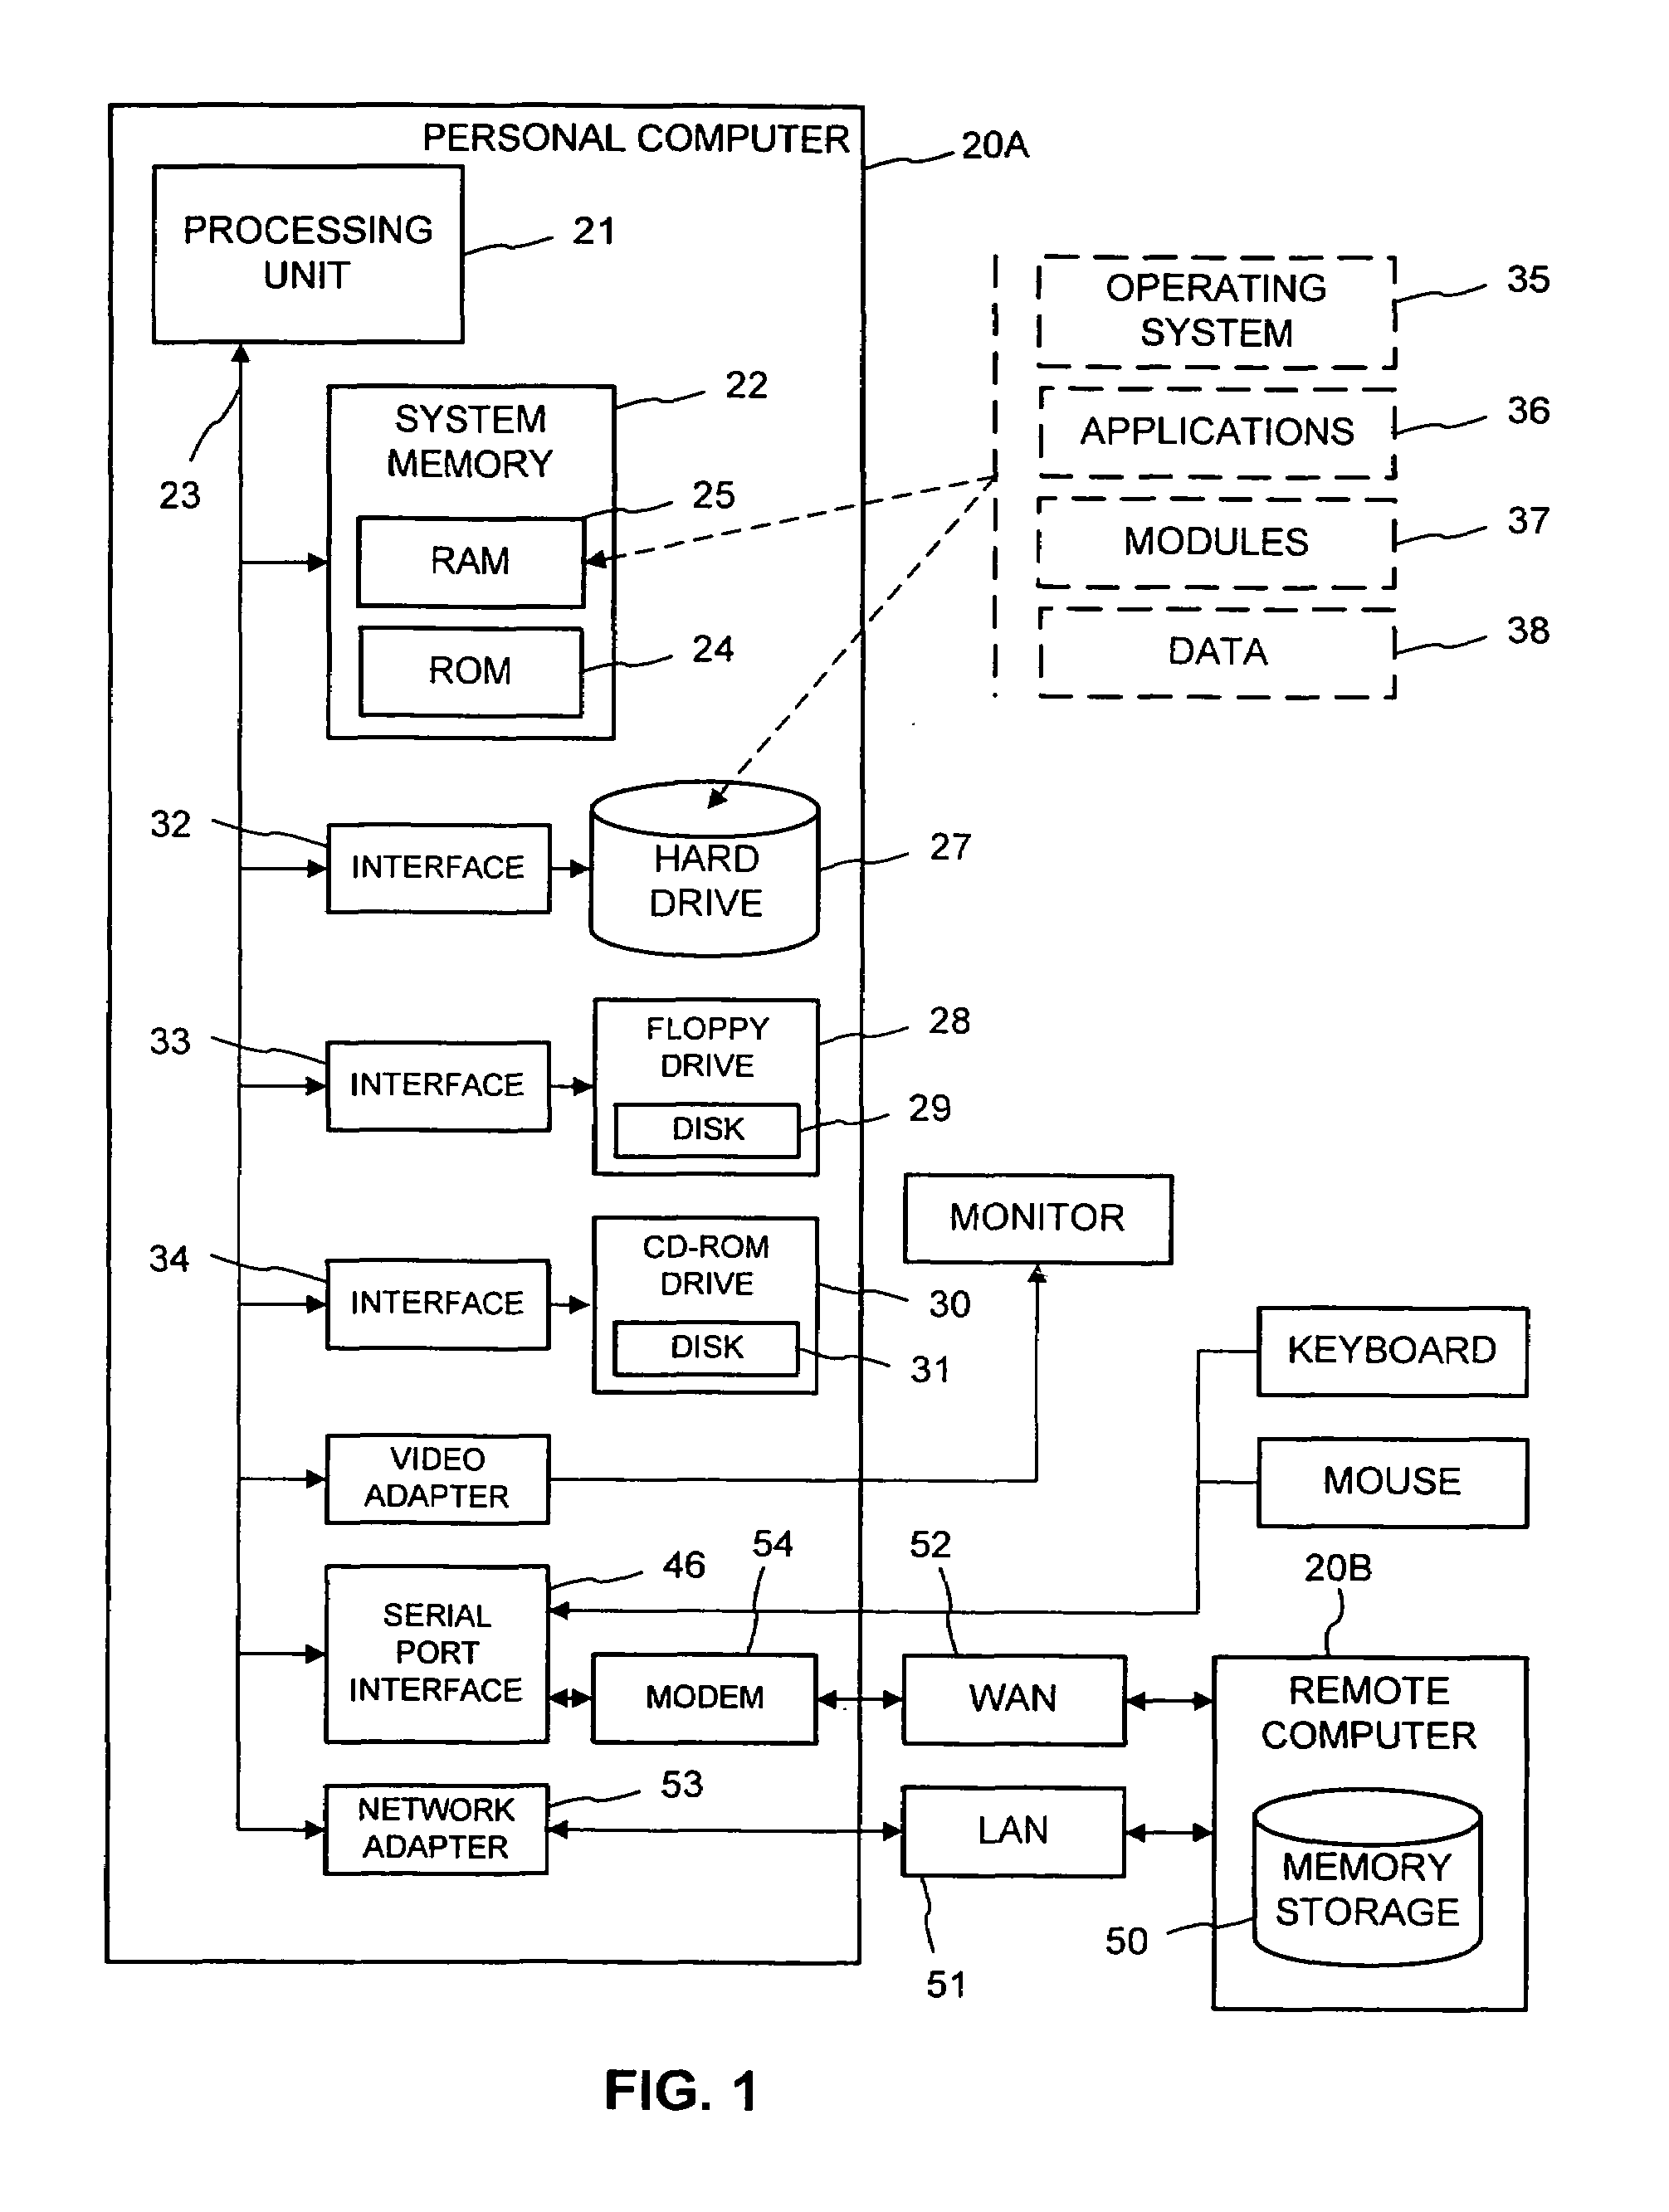 Method and system for updating software with smaller patch files